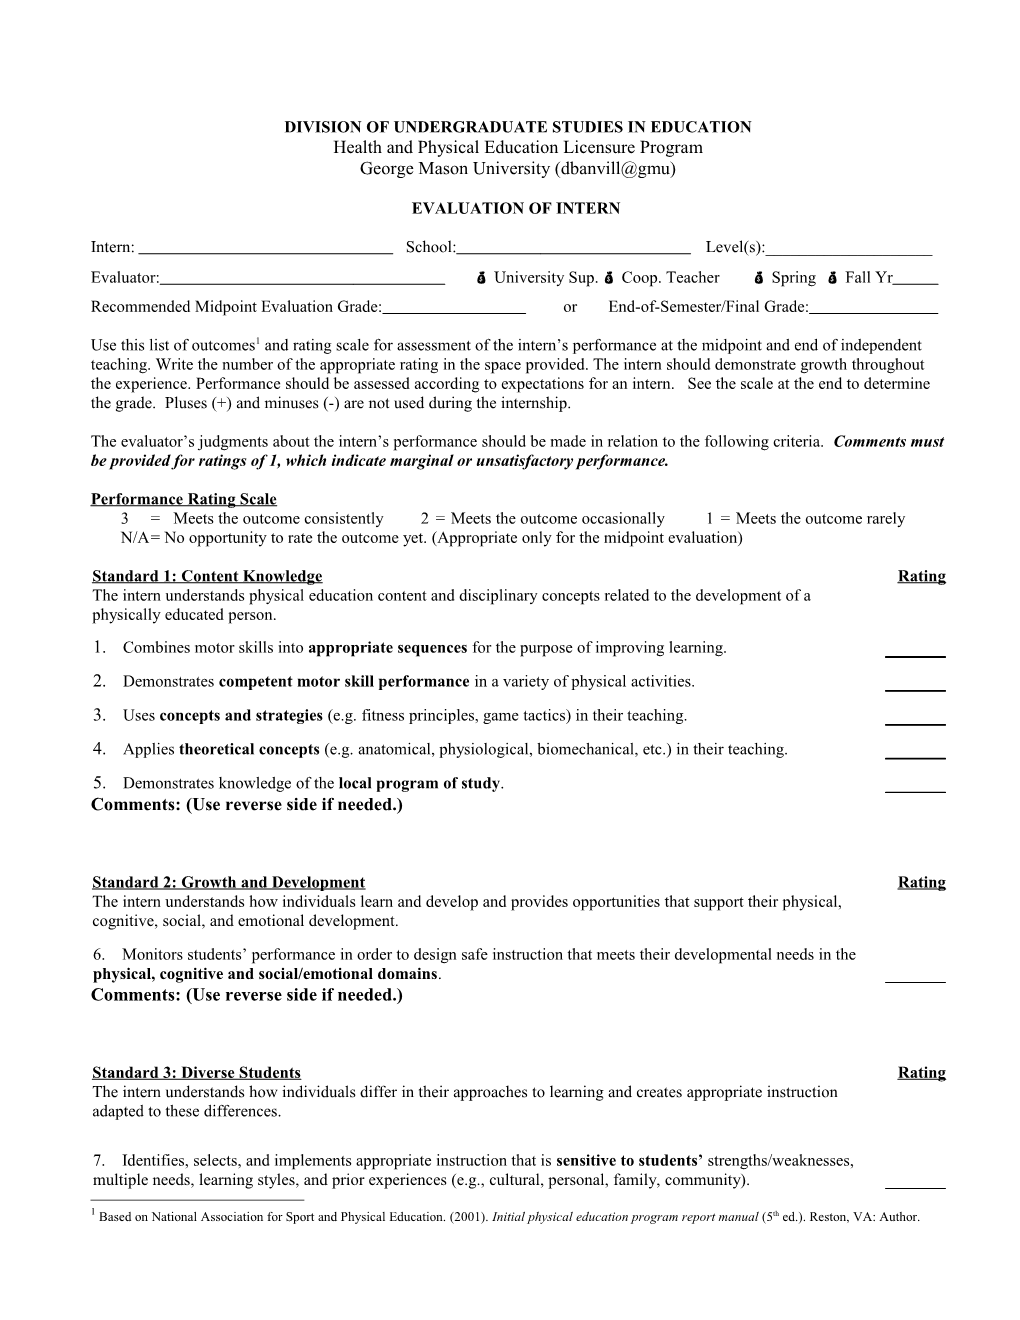 Profile for Evaluation of Interns